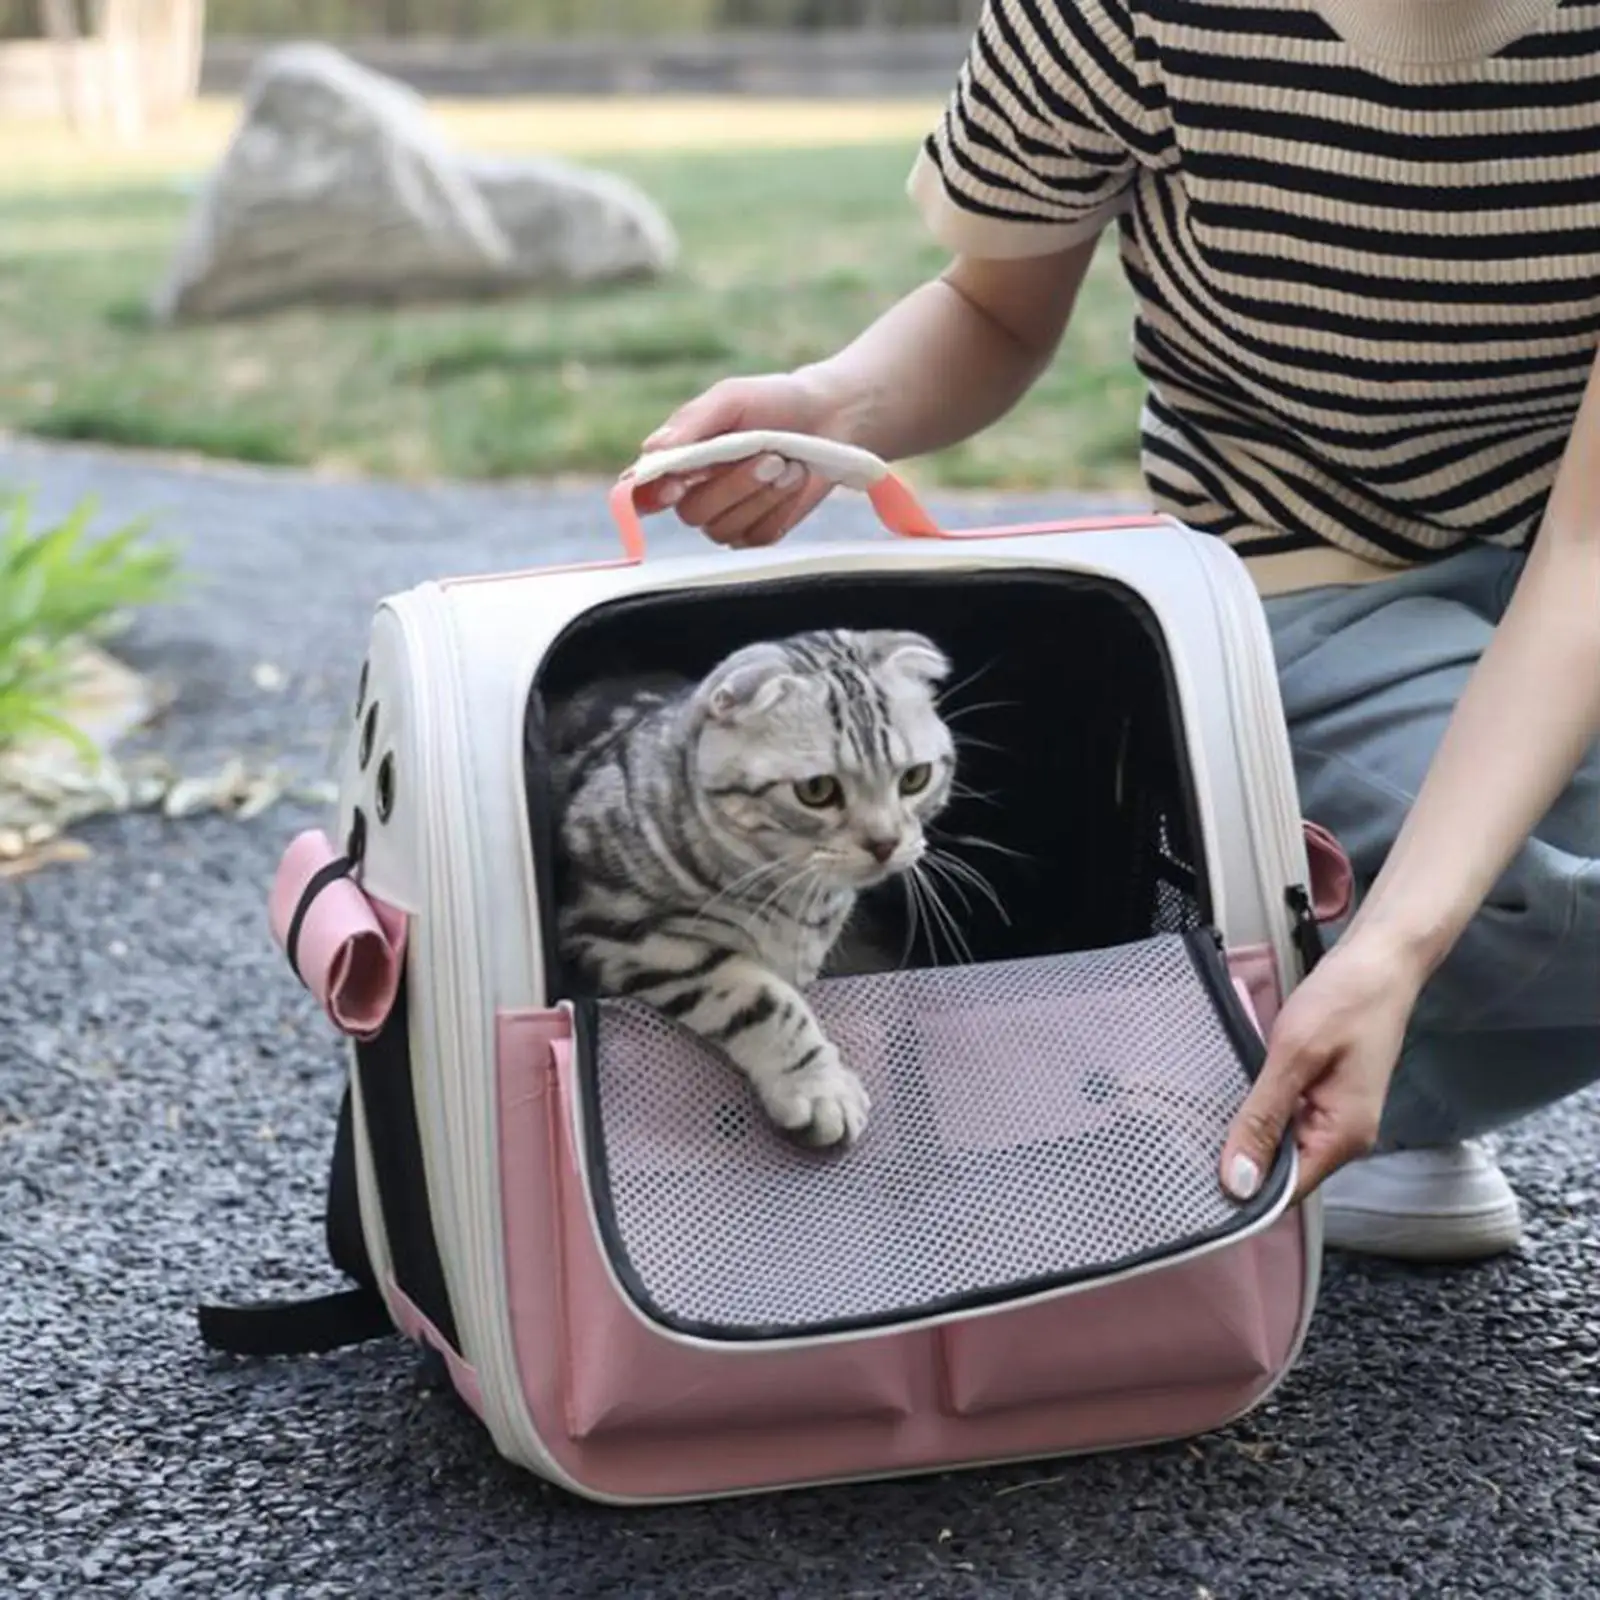 Pet Cat Carrier Backpack Multifunction Transport Portable Foldable Pet Travel Bag for Walking Outdoor Use Small Dogs Travel Cats